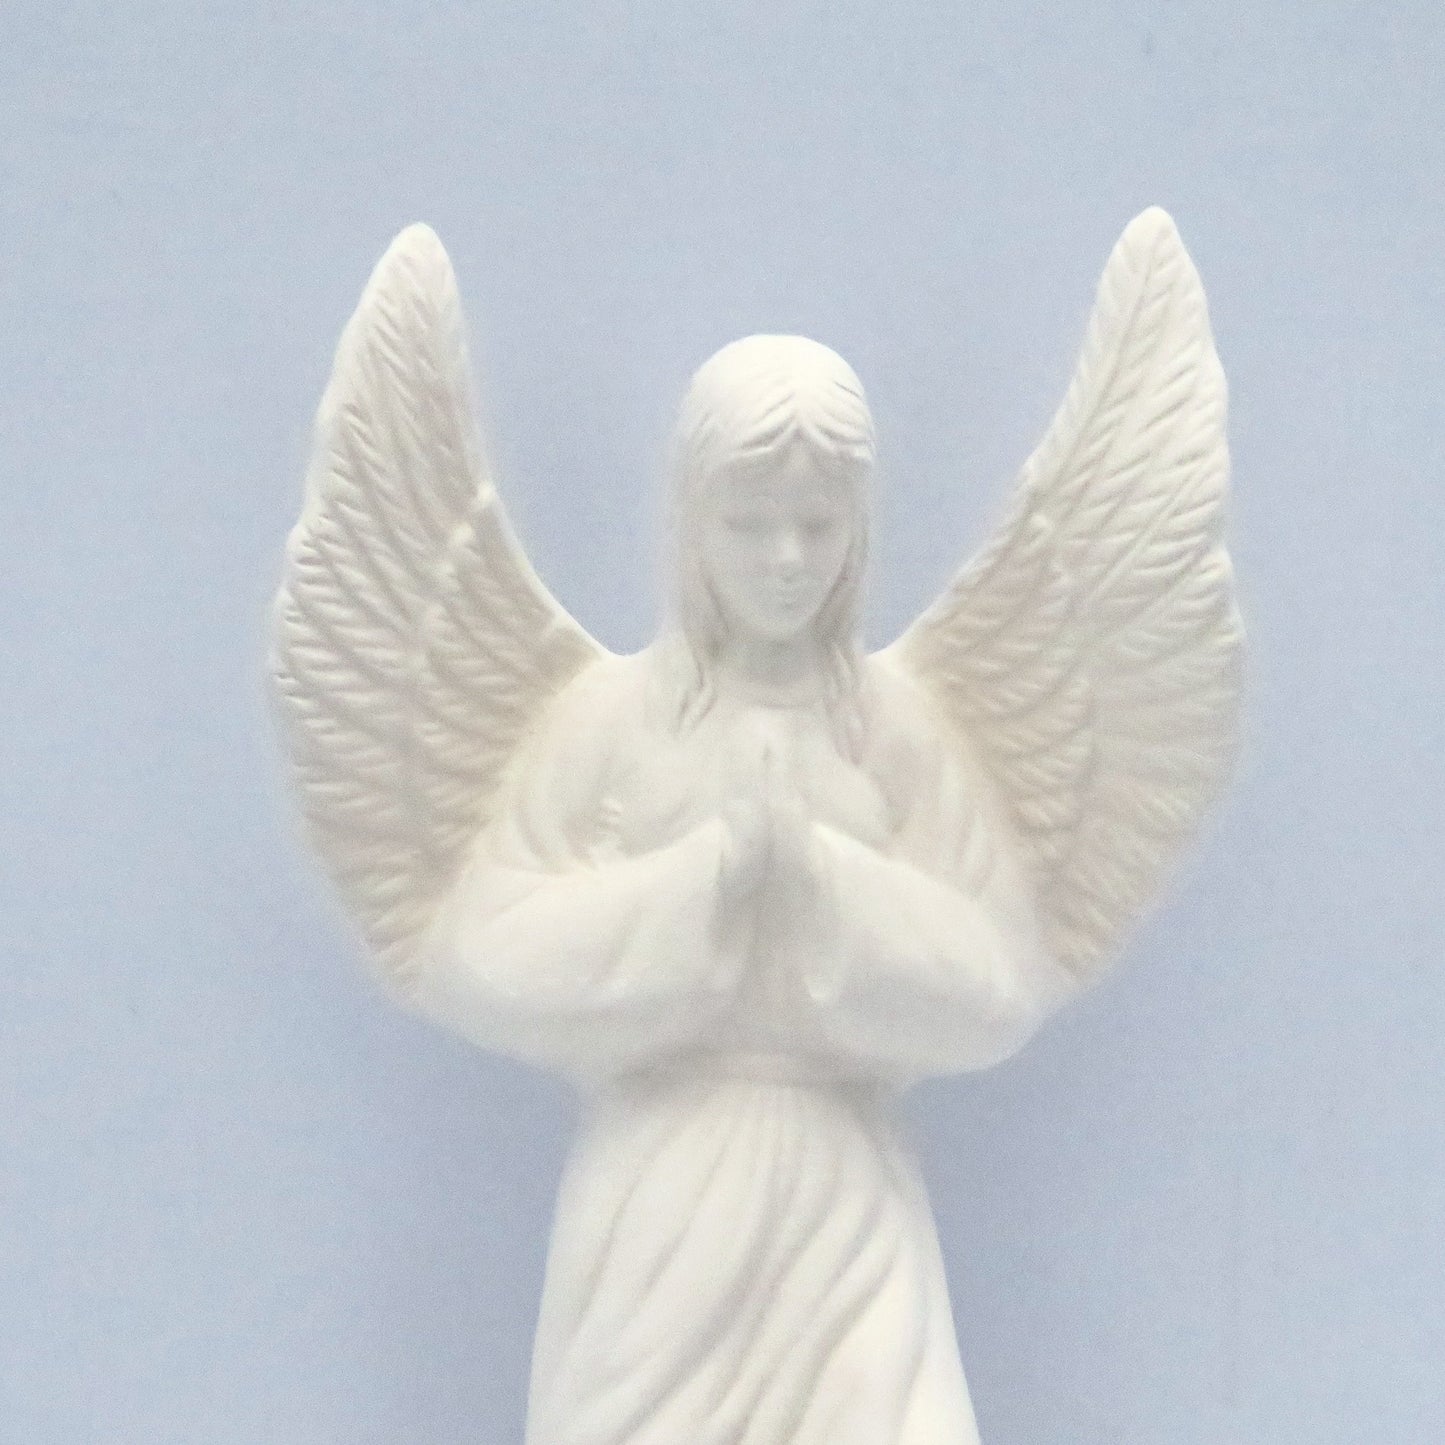 close up of upper section of ready to paint praying ceramic angel statue